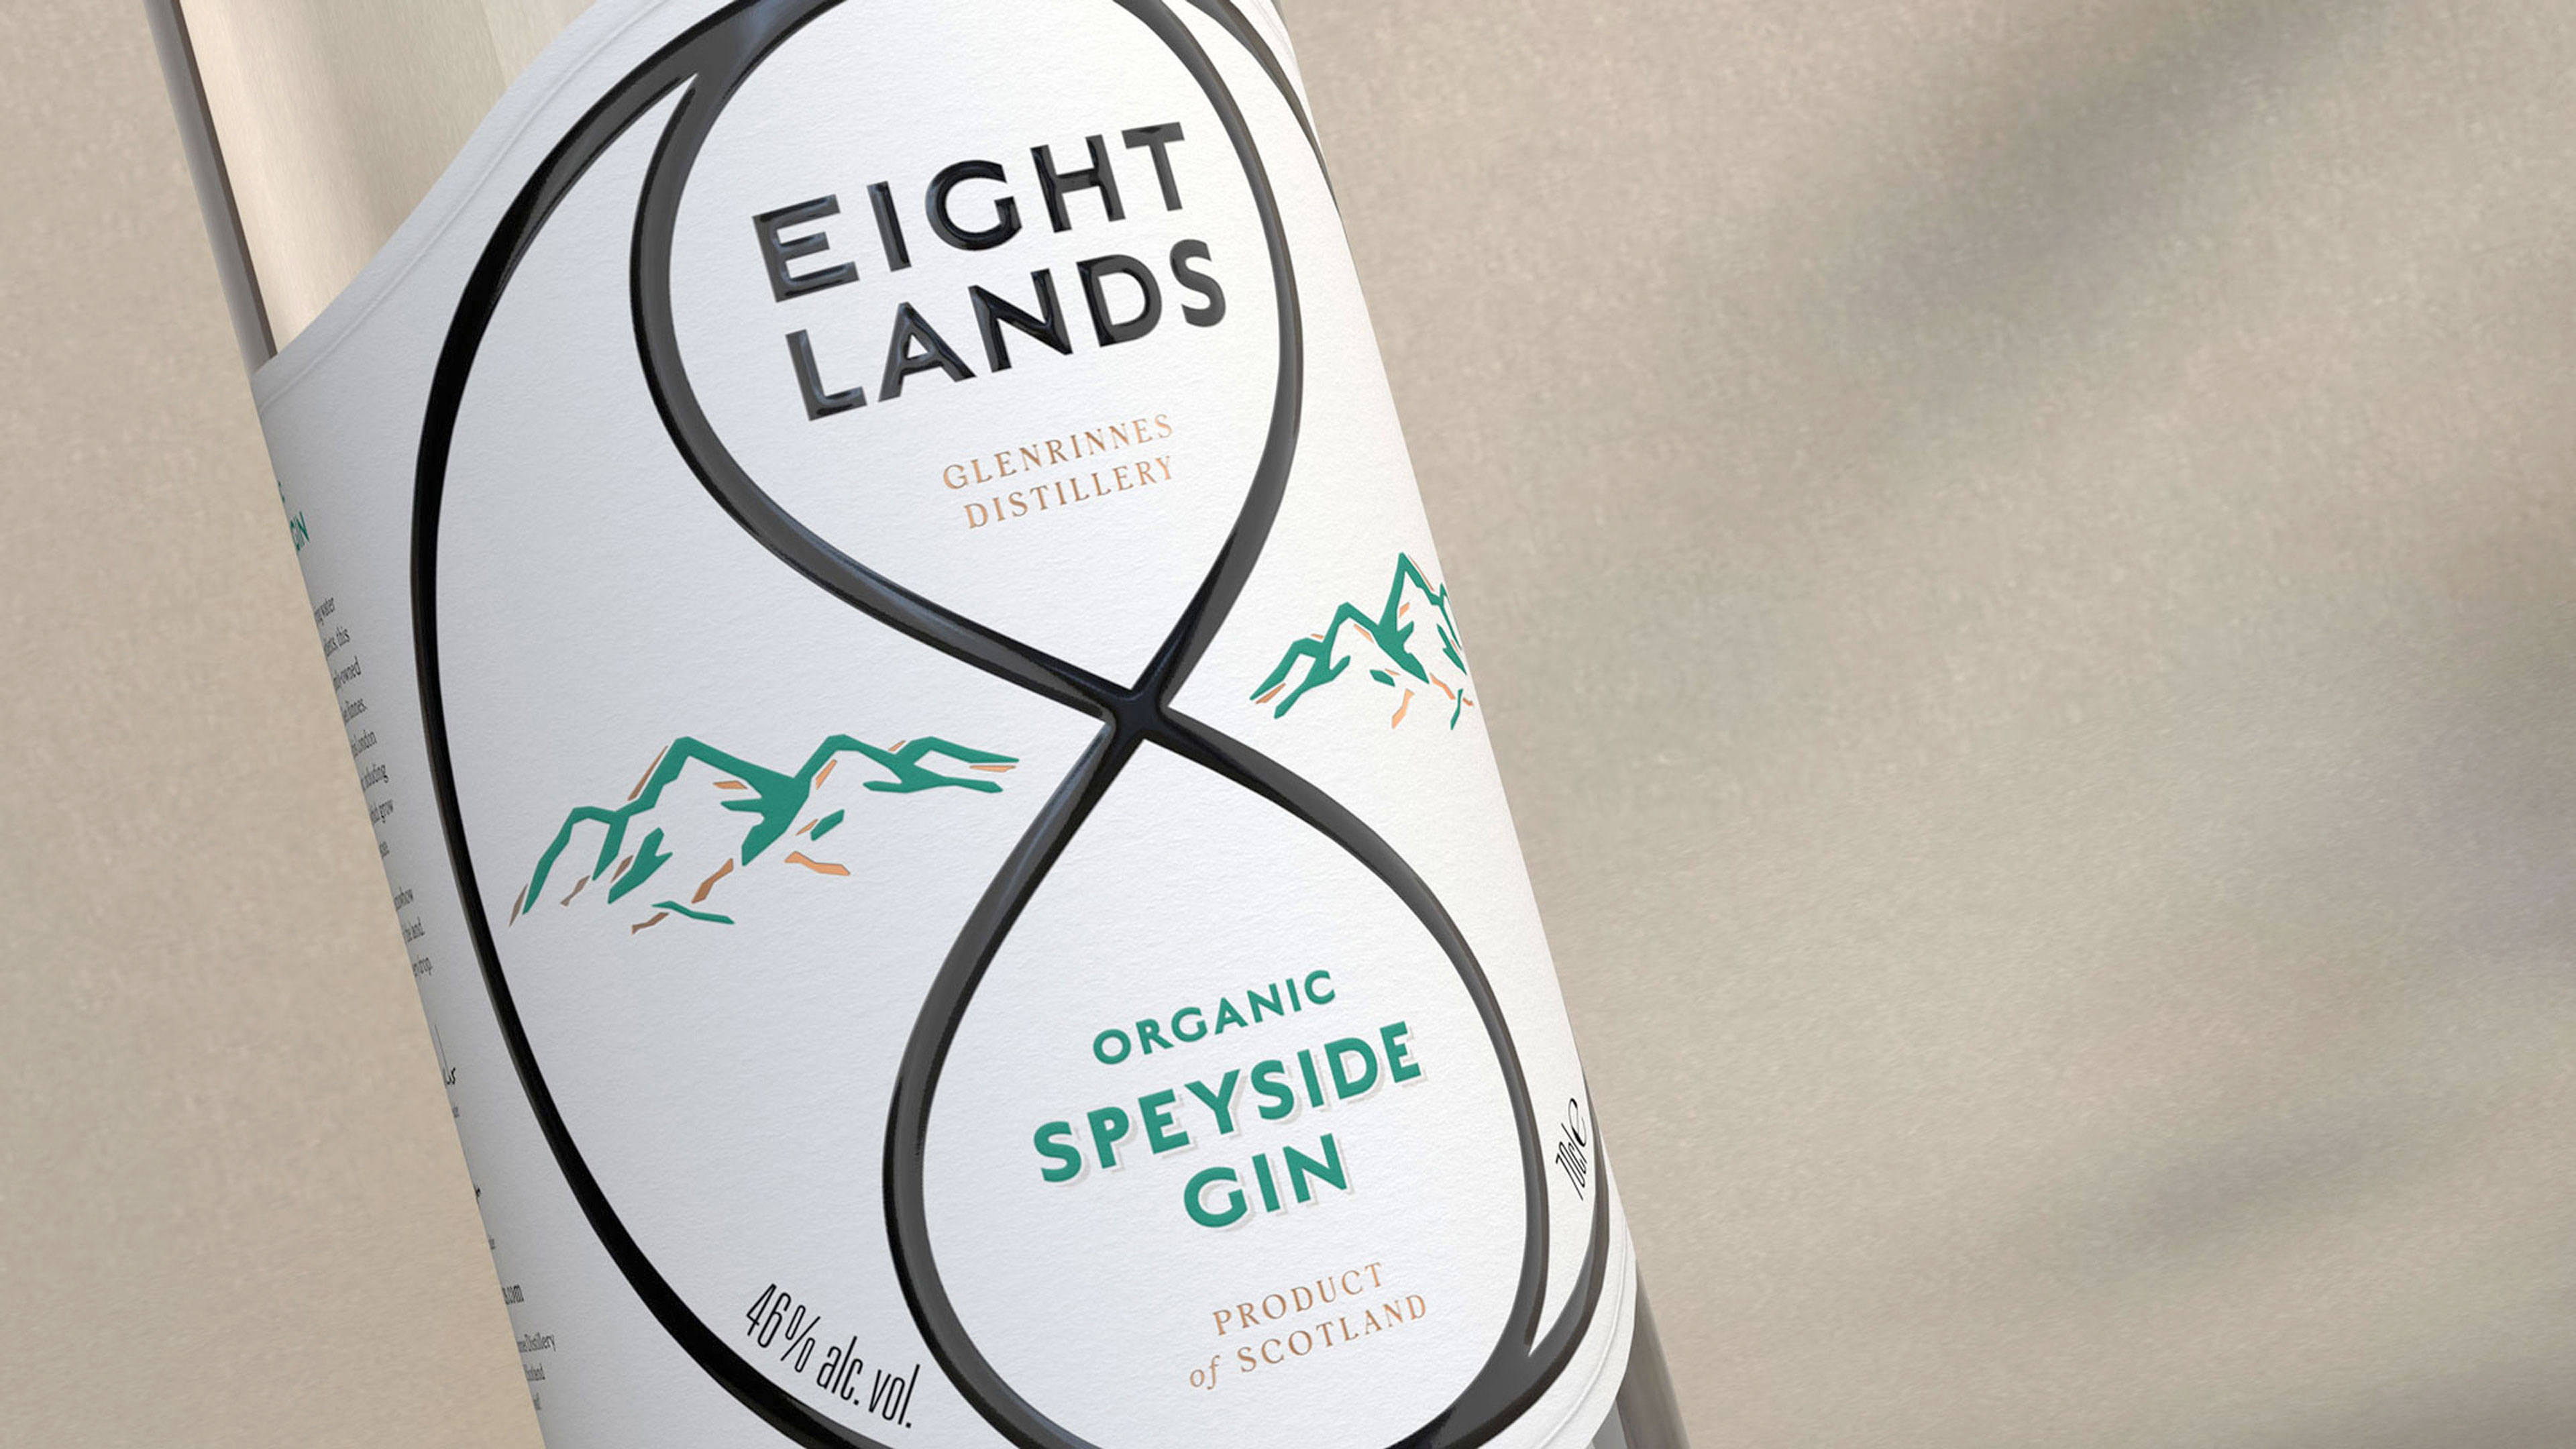 From Farm to Bottle: Eight Lands’ All-Organic Spirits Branding by Cooper and Flint